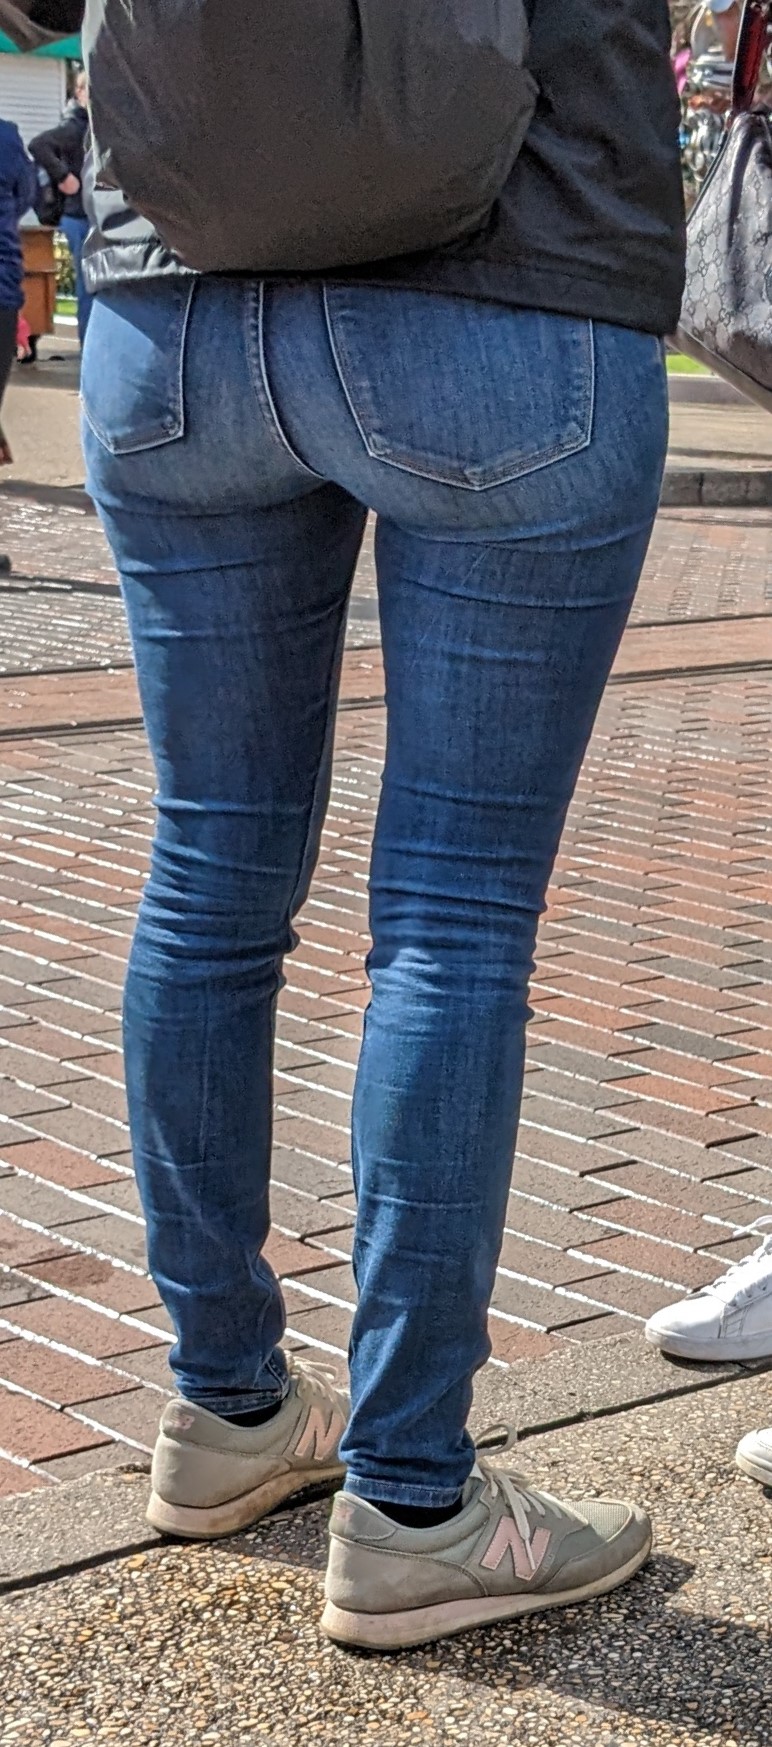 M!lf with thight blue jeans in amusement park (FR) - Tight Jeans - Forum